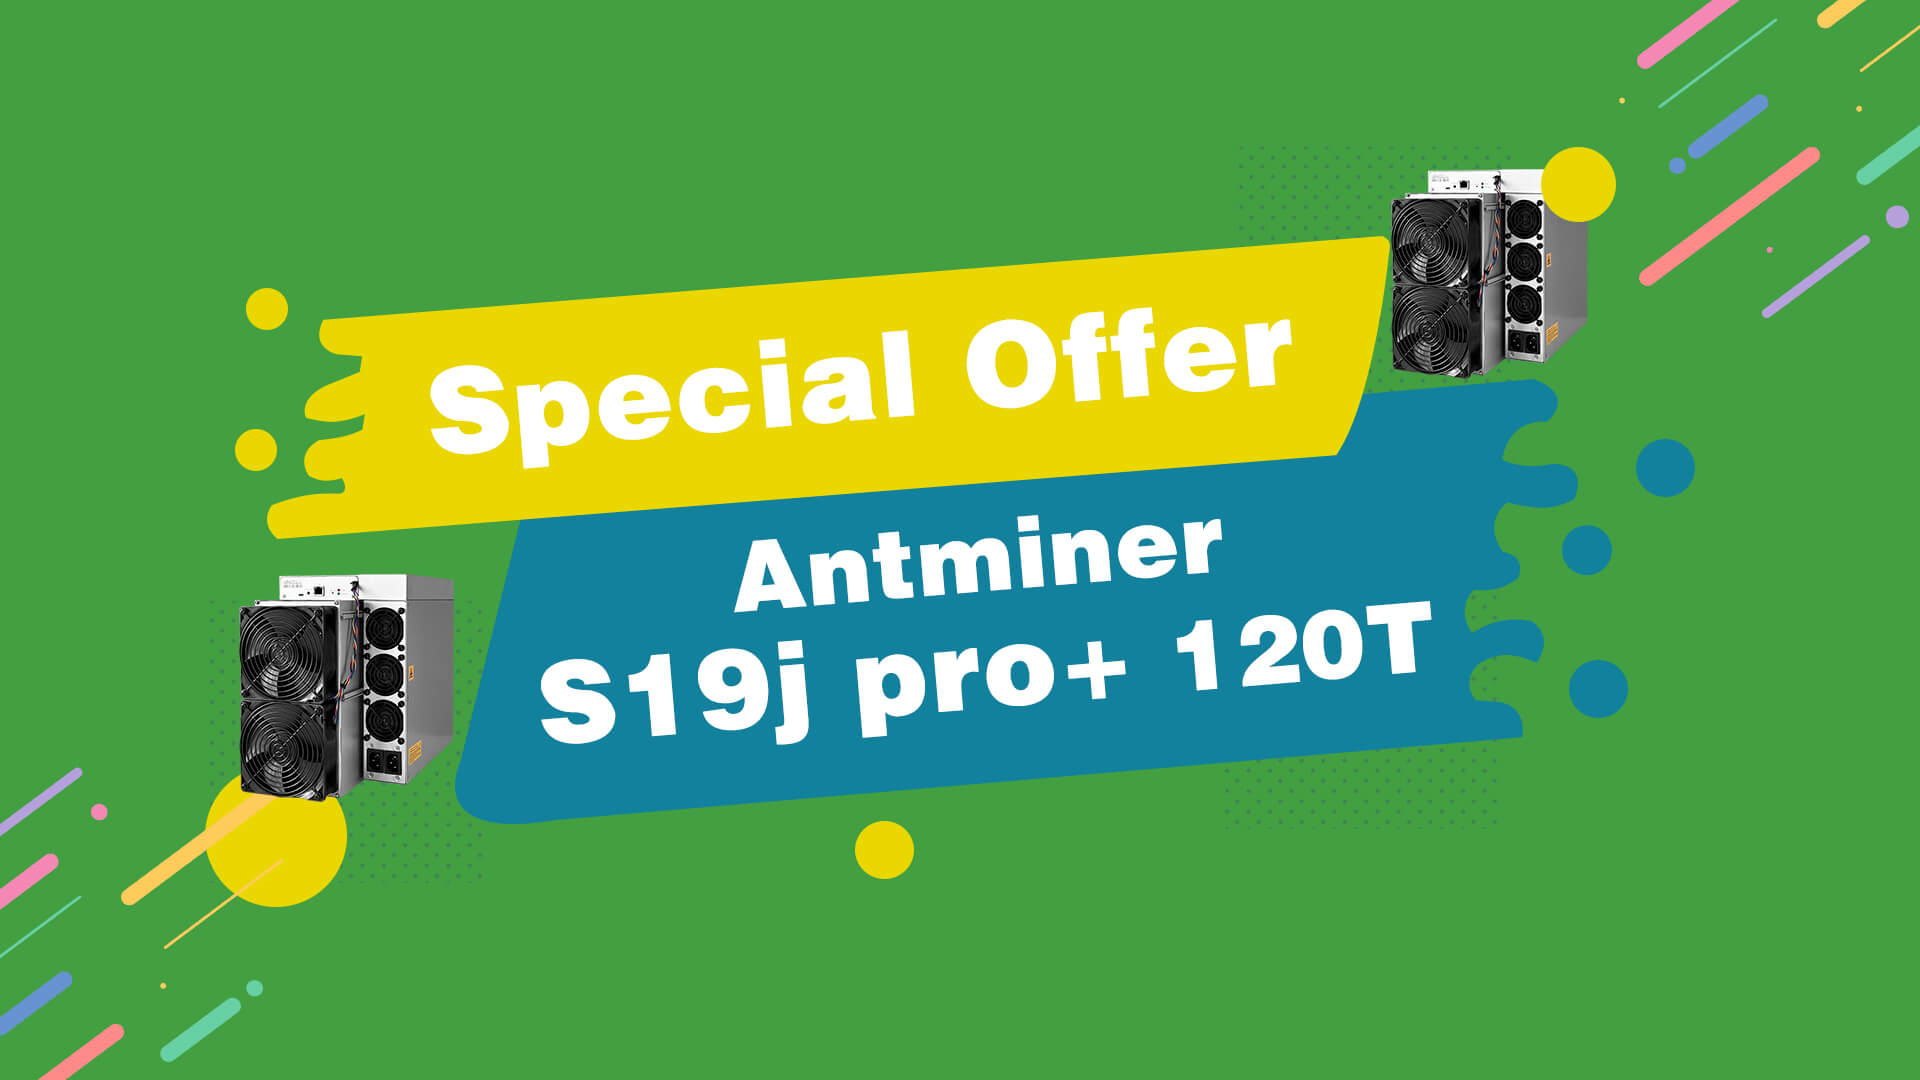 Special offer for Antminer S19j Pro+ 120T